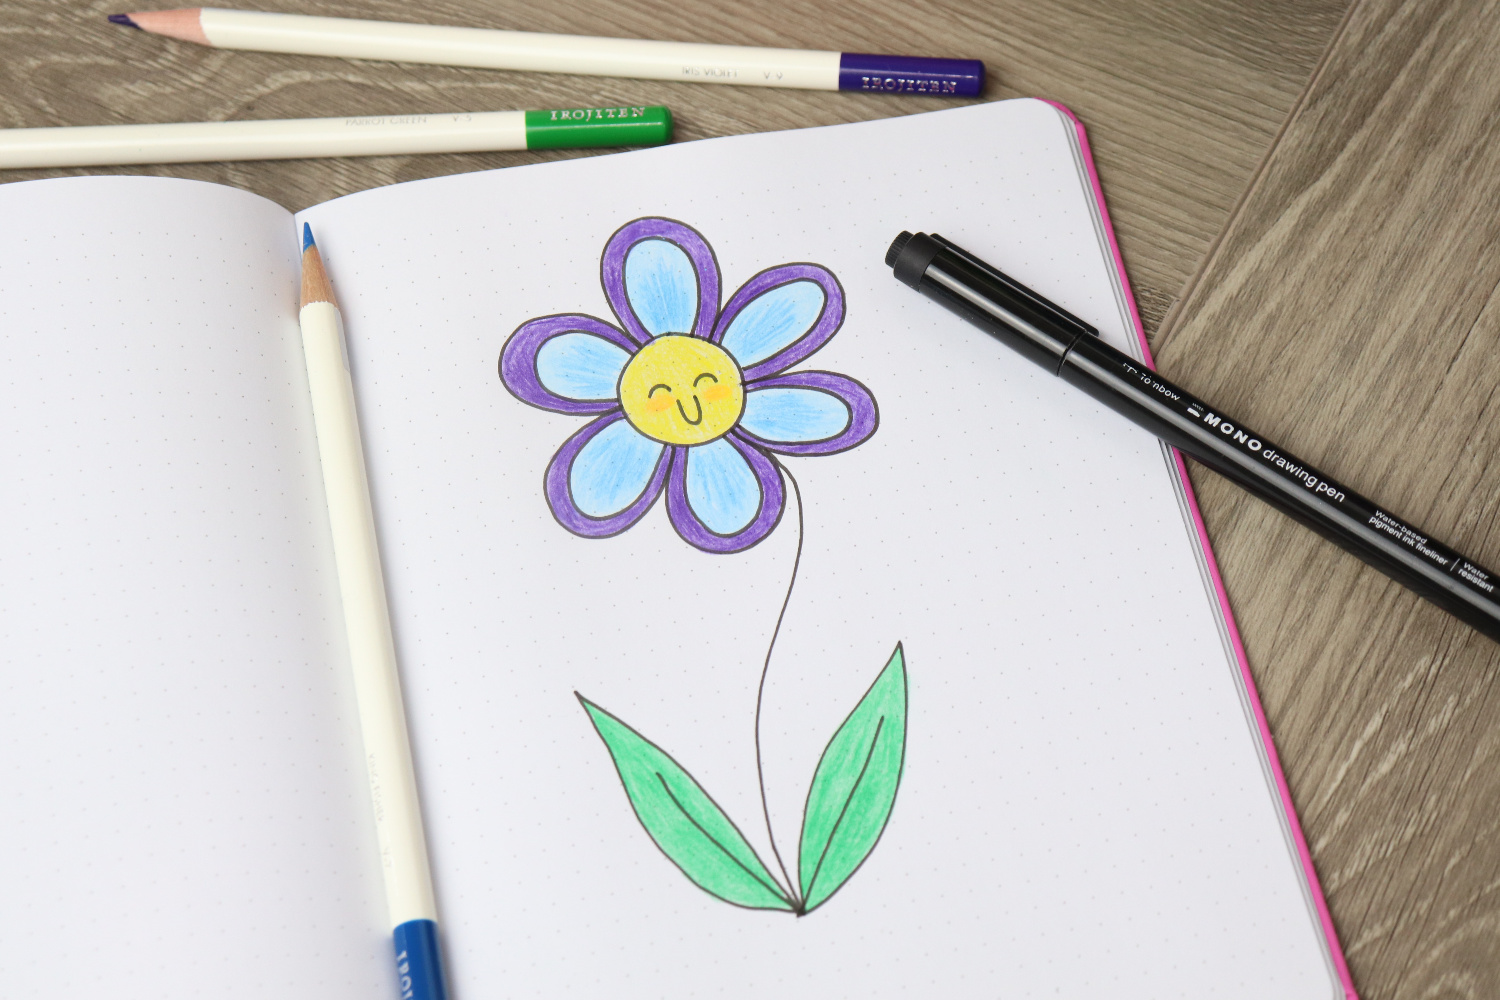 Image contains an open sketchbook on a wooden desk, with a flower doodled on the page. It is colored with purple, blue, yellow, and green colored pencils, which sit on the desk around it, along with a MONO Drawing Pen.